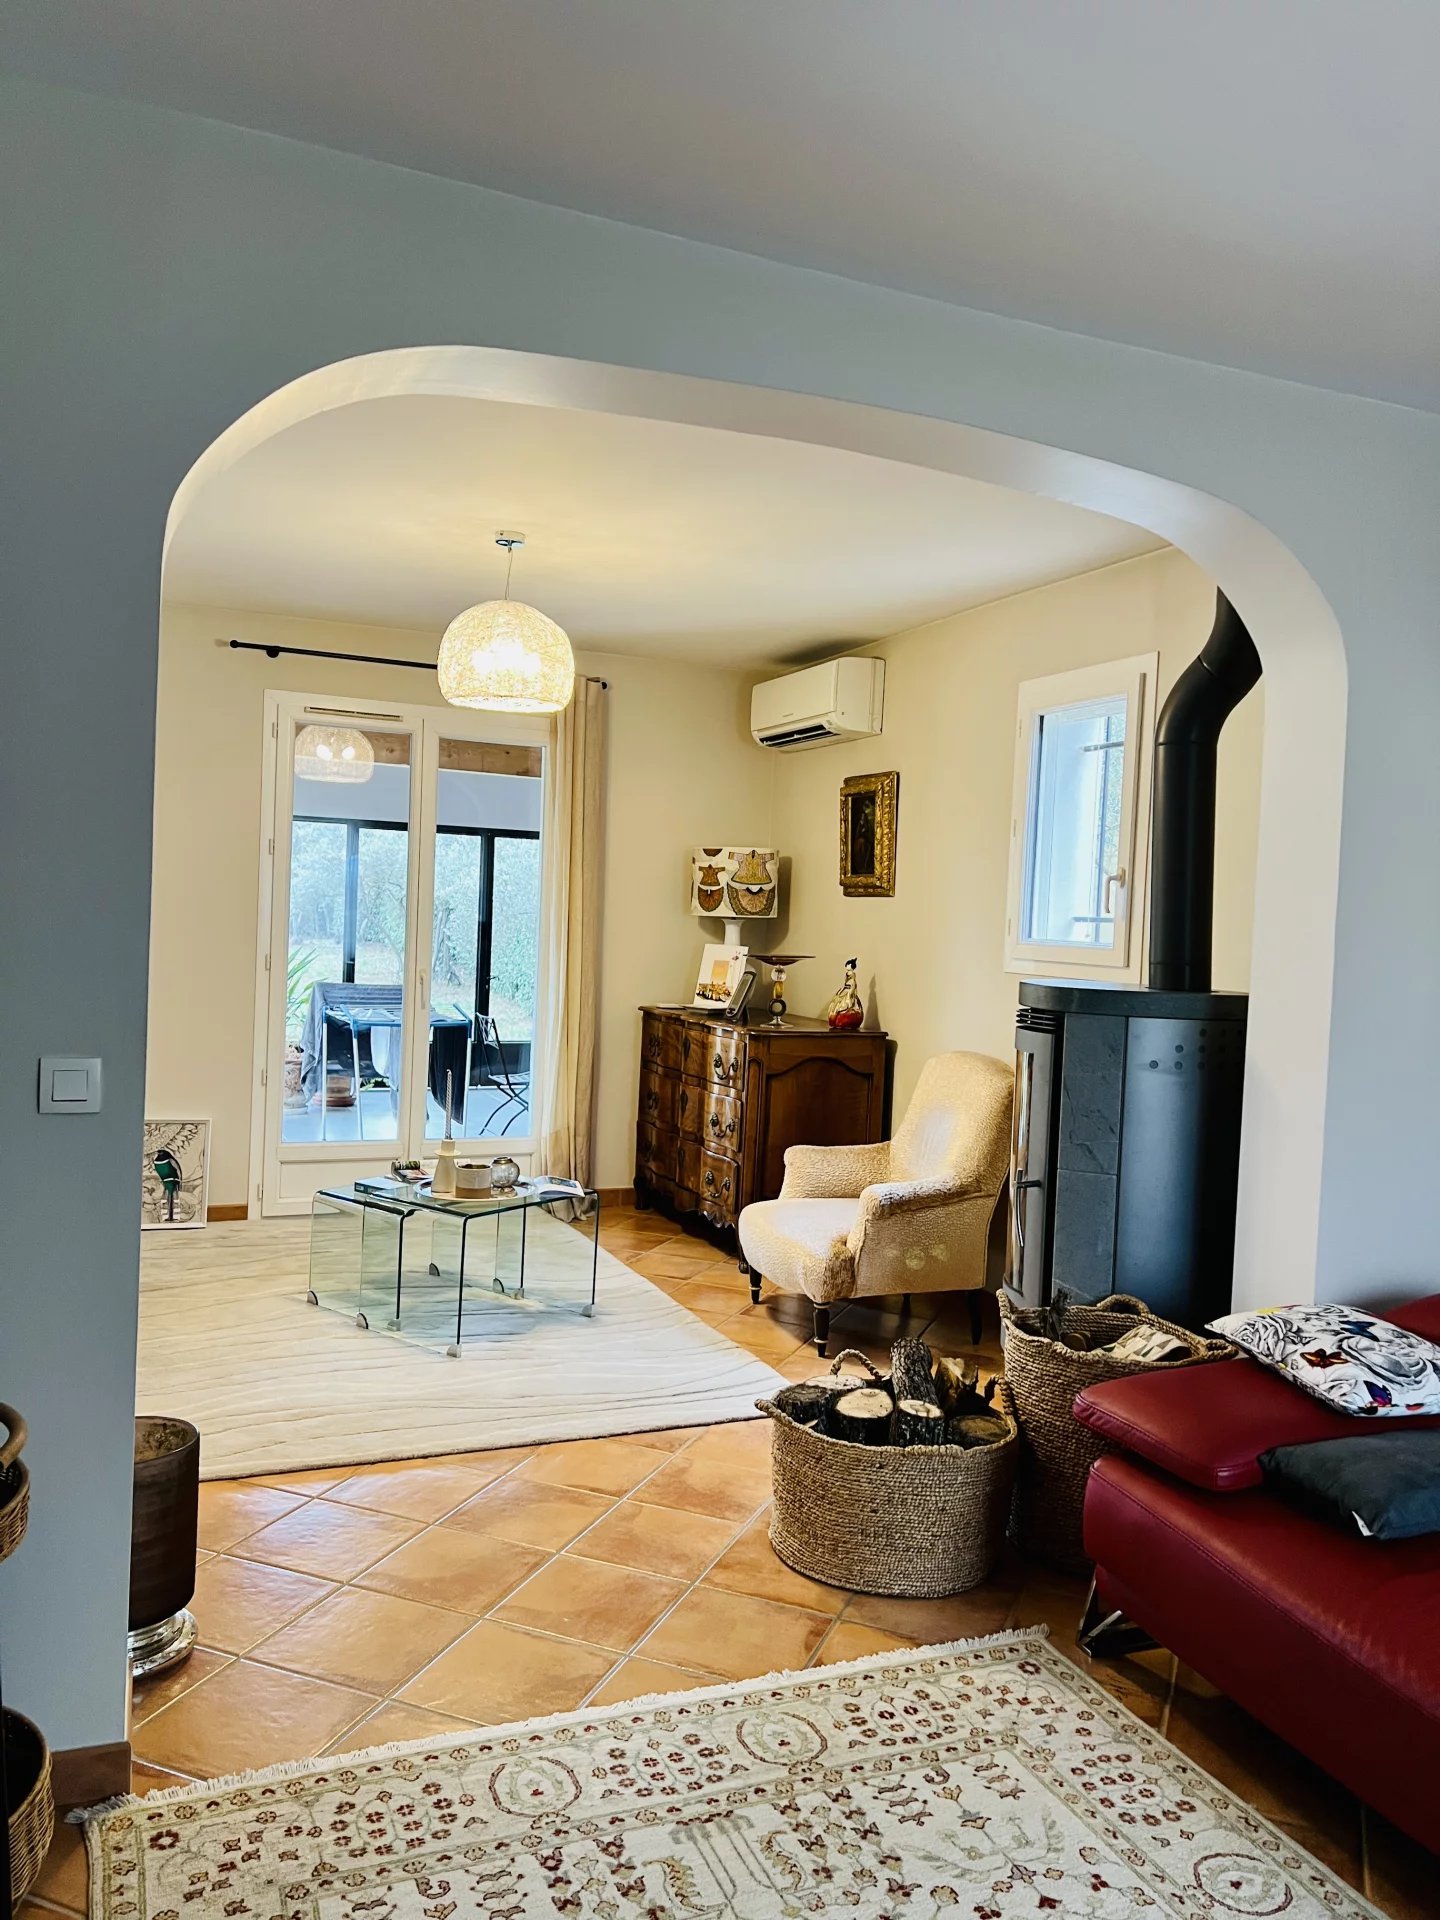 Provencal villa offering high quality fittings, in a quiet area.